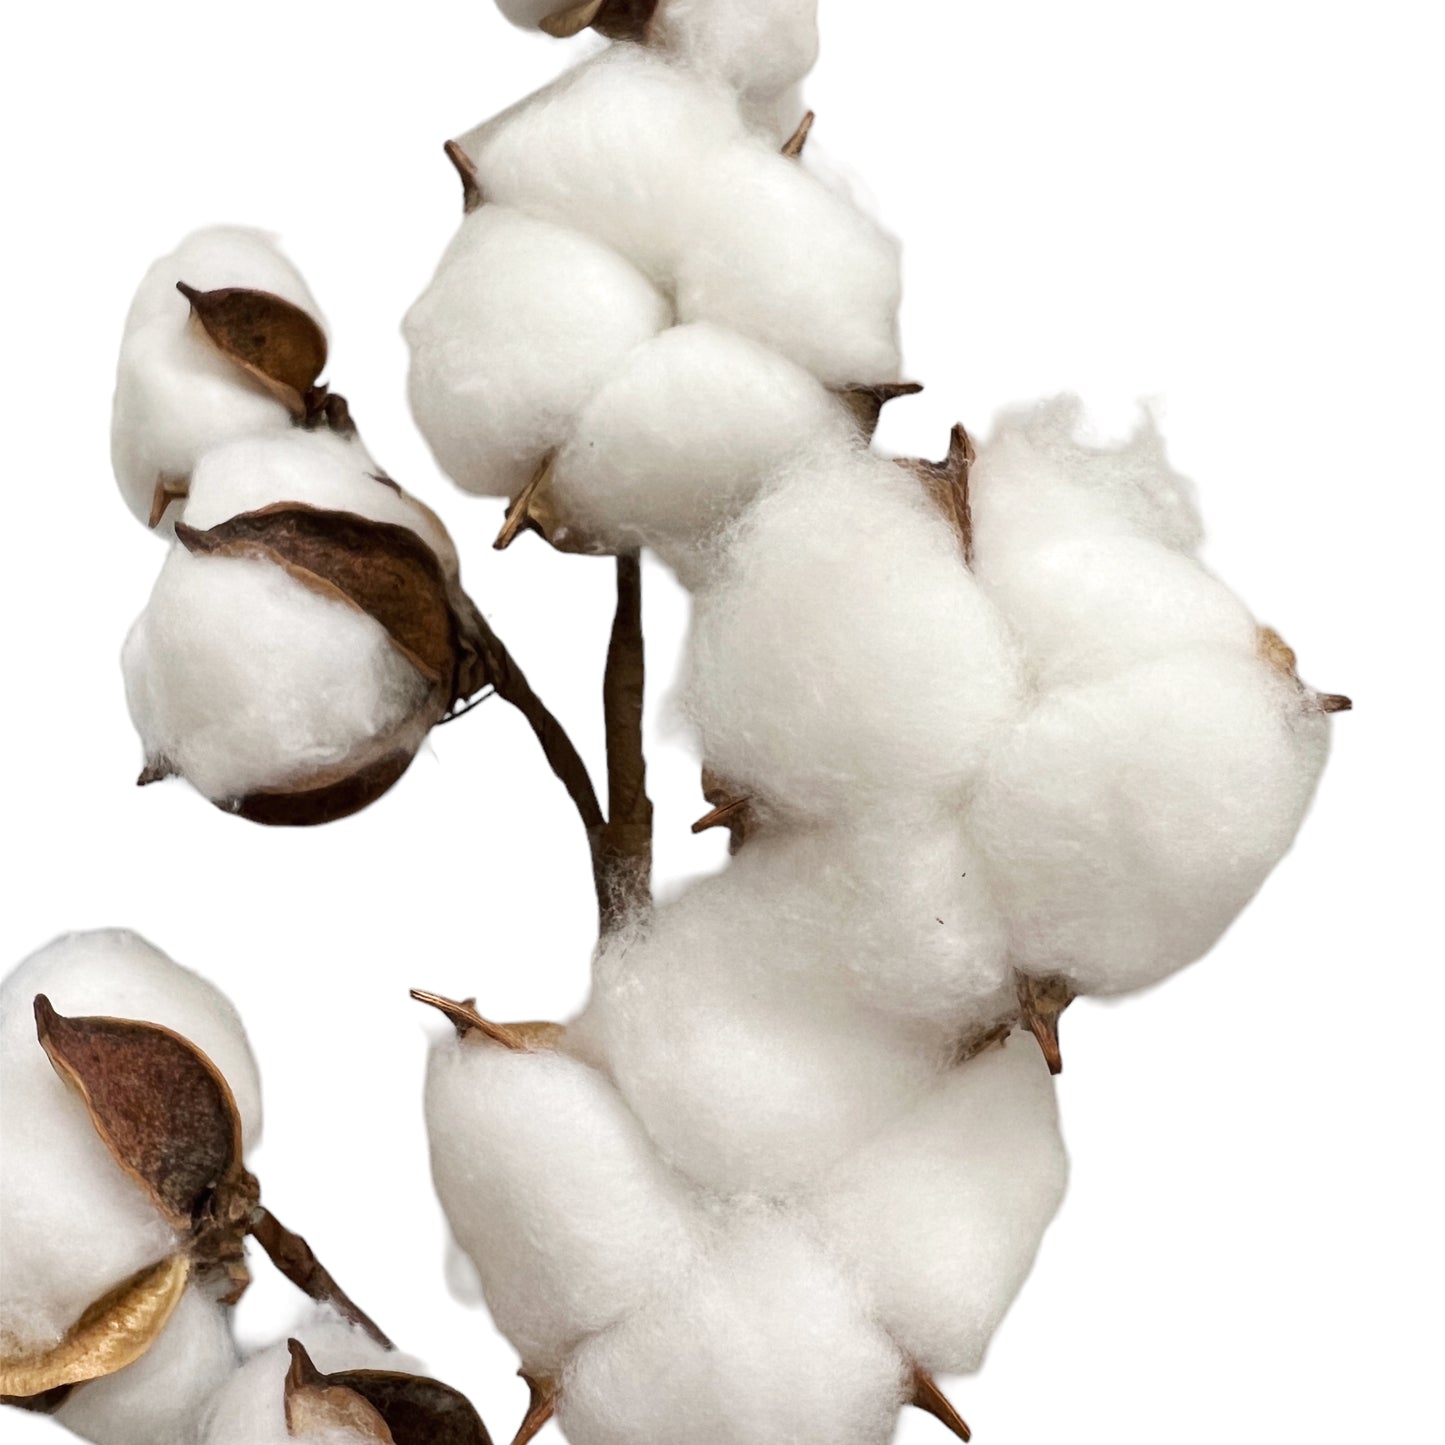 21-Inch Tall Artificial Cotton Flower Stem with 10 Cotton Bolls per Stem, Set of 2